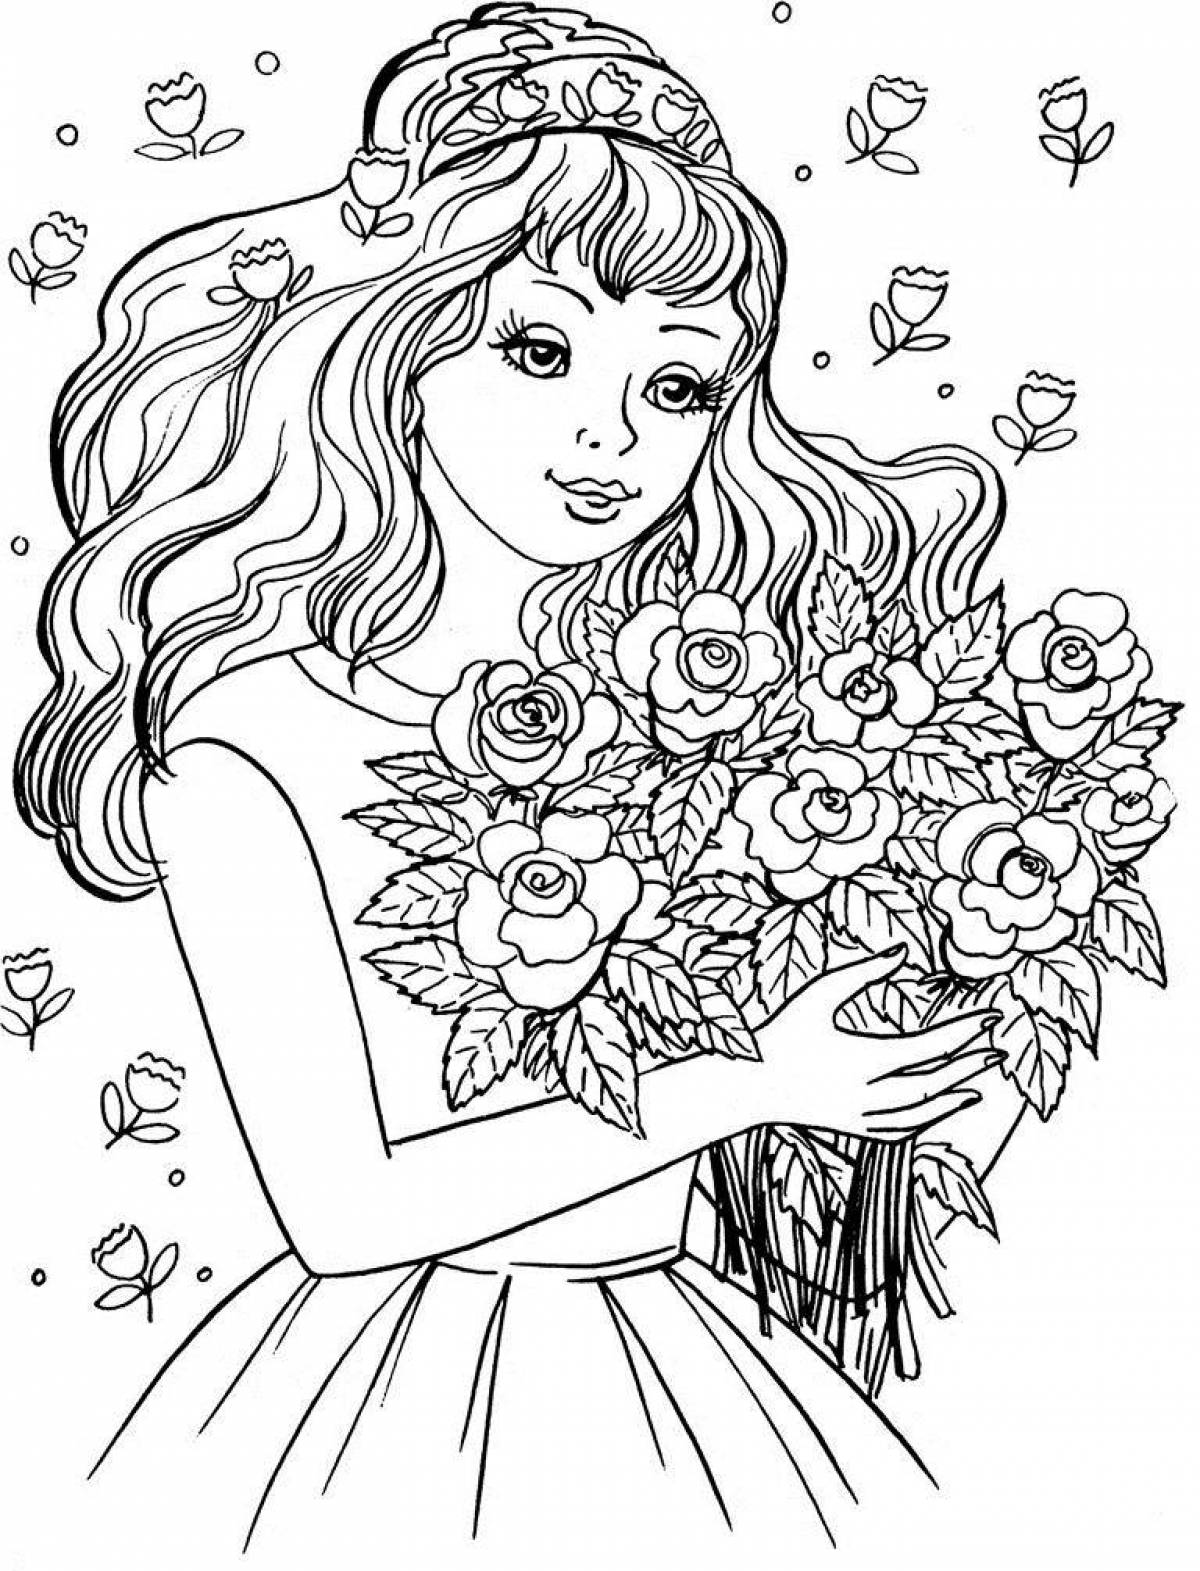 Color-frenzy coloring page for girls 8-9 years old